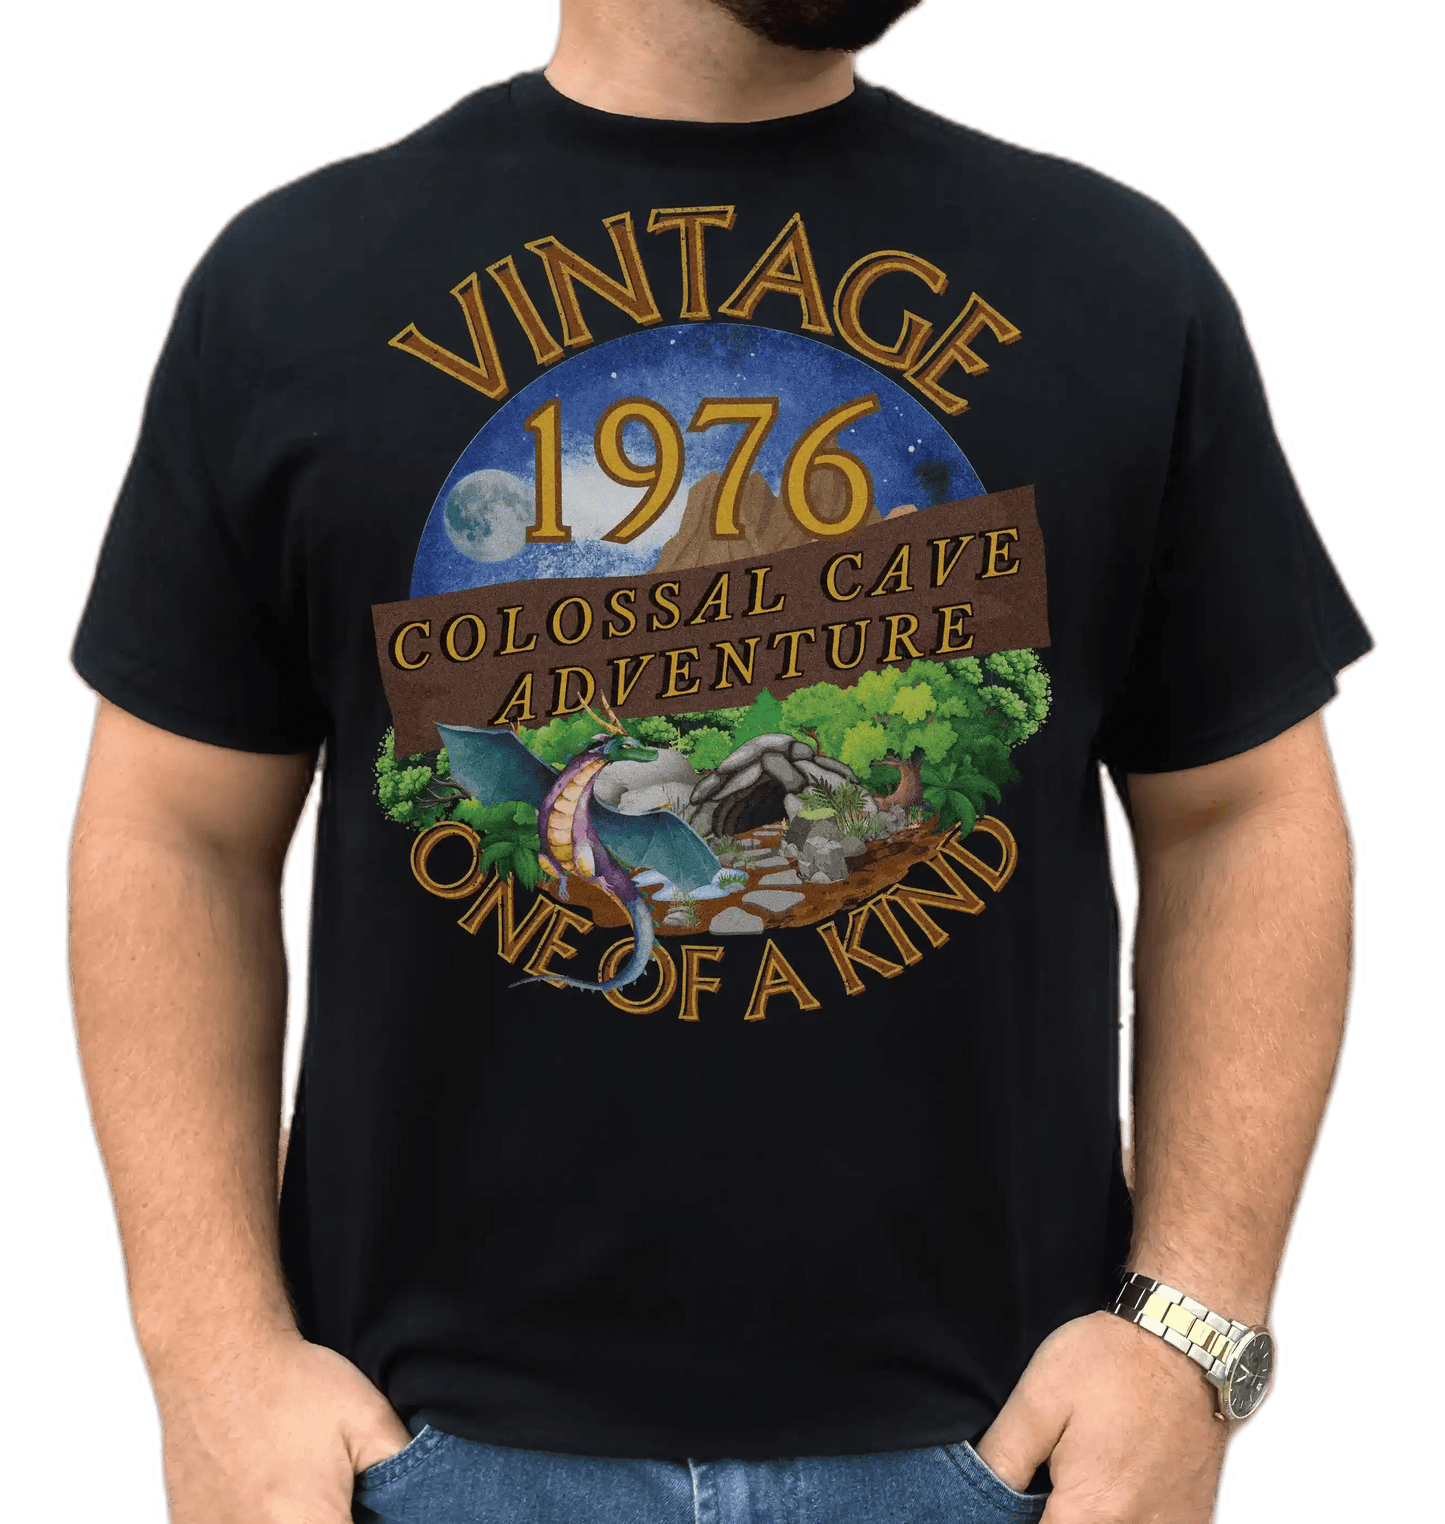 A man wearing a black T-Shirt with words vintage,1976,colossal cave adventure,one of a kind,circular picture of a dragon,cave and woodland,night sky